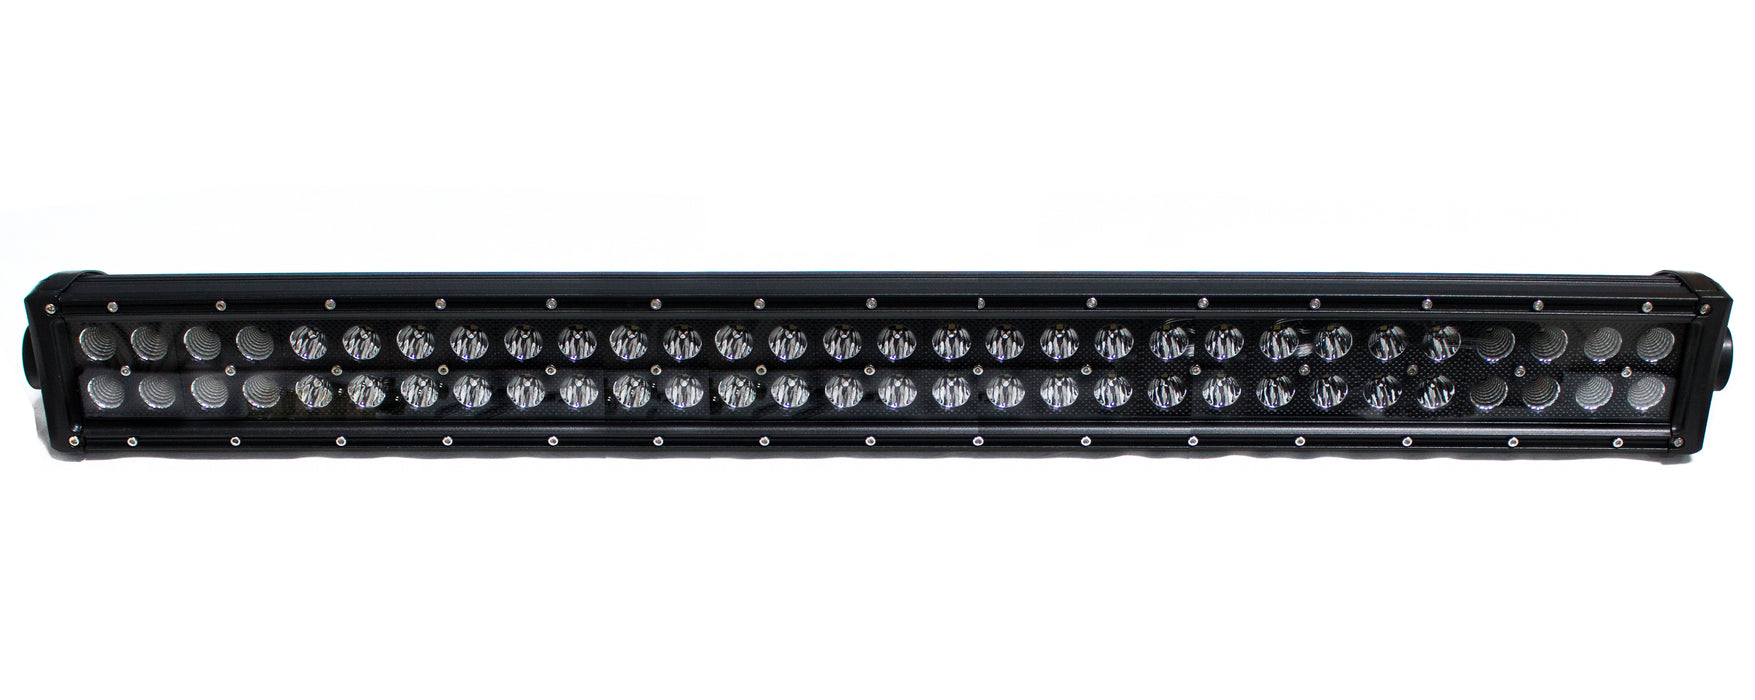 BLACKED OUT® Series 30in Straight, Double Row, Silver Combo-Flood/Beam Straight Hi Performance Light Bar 180w